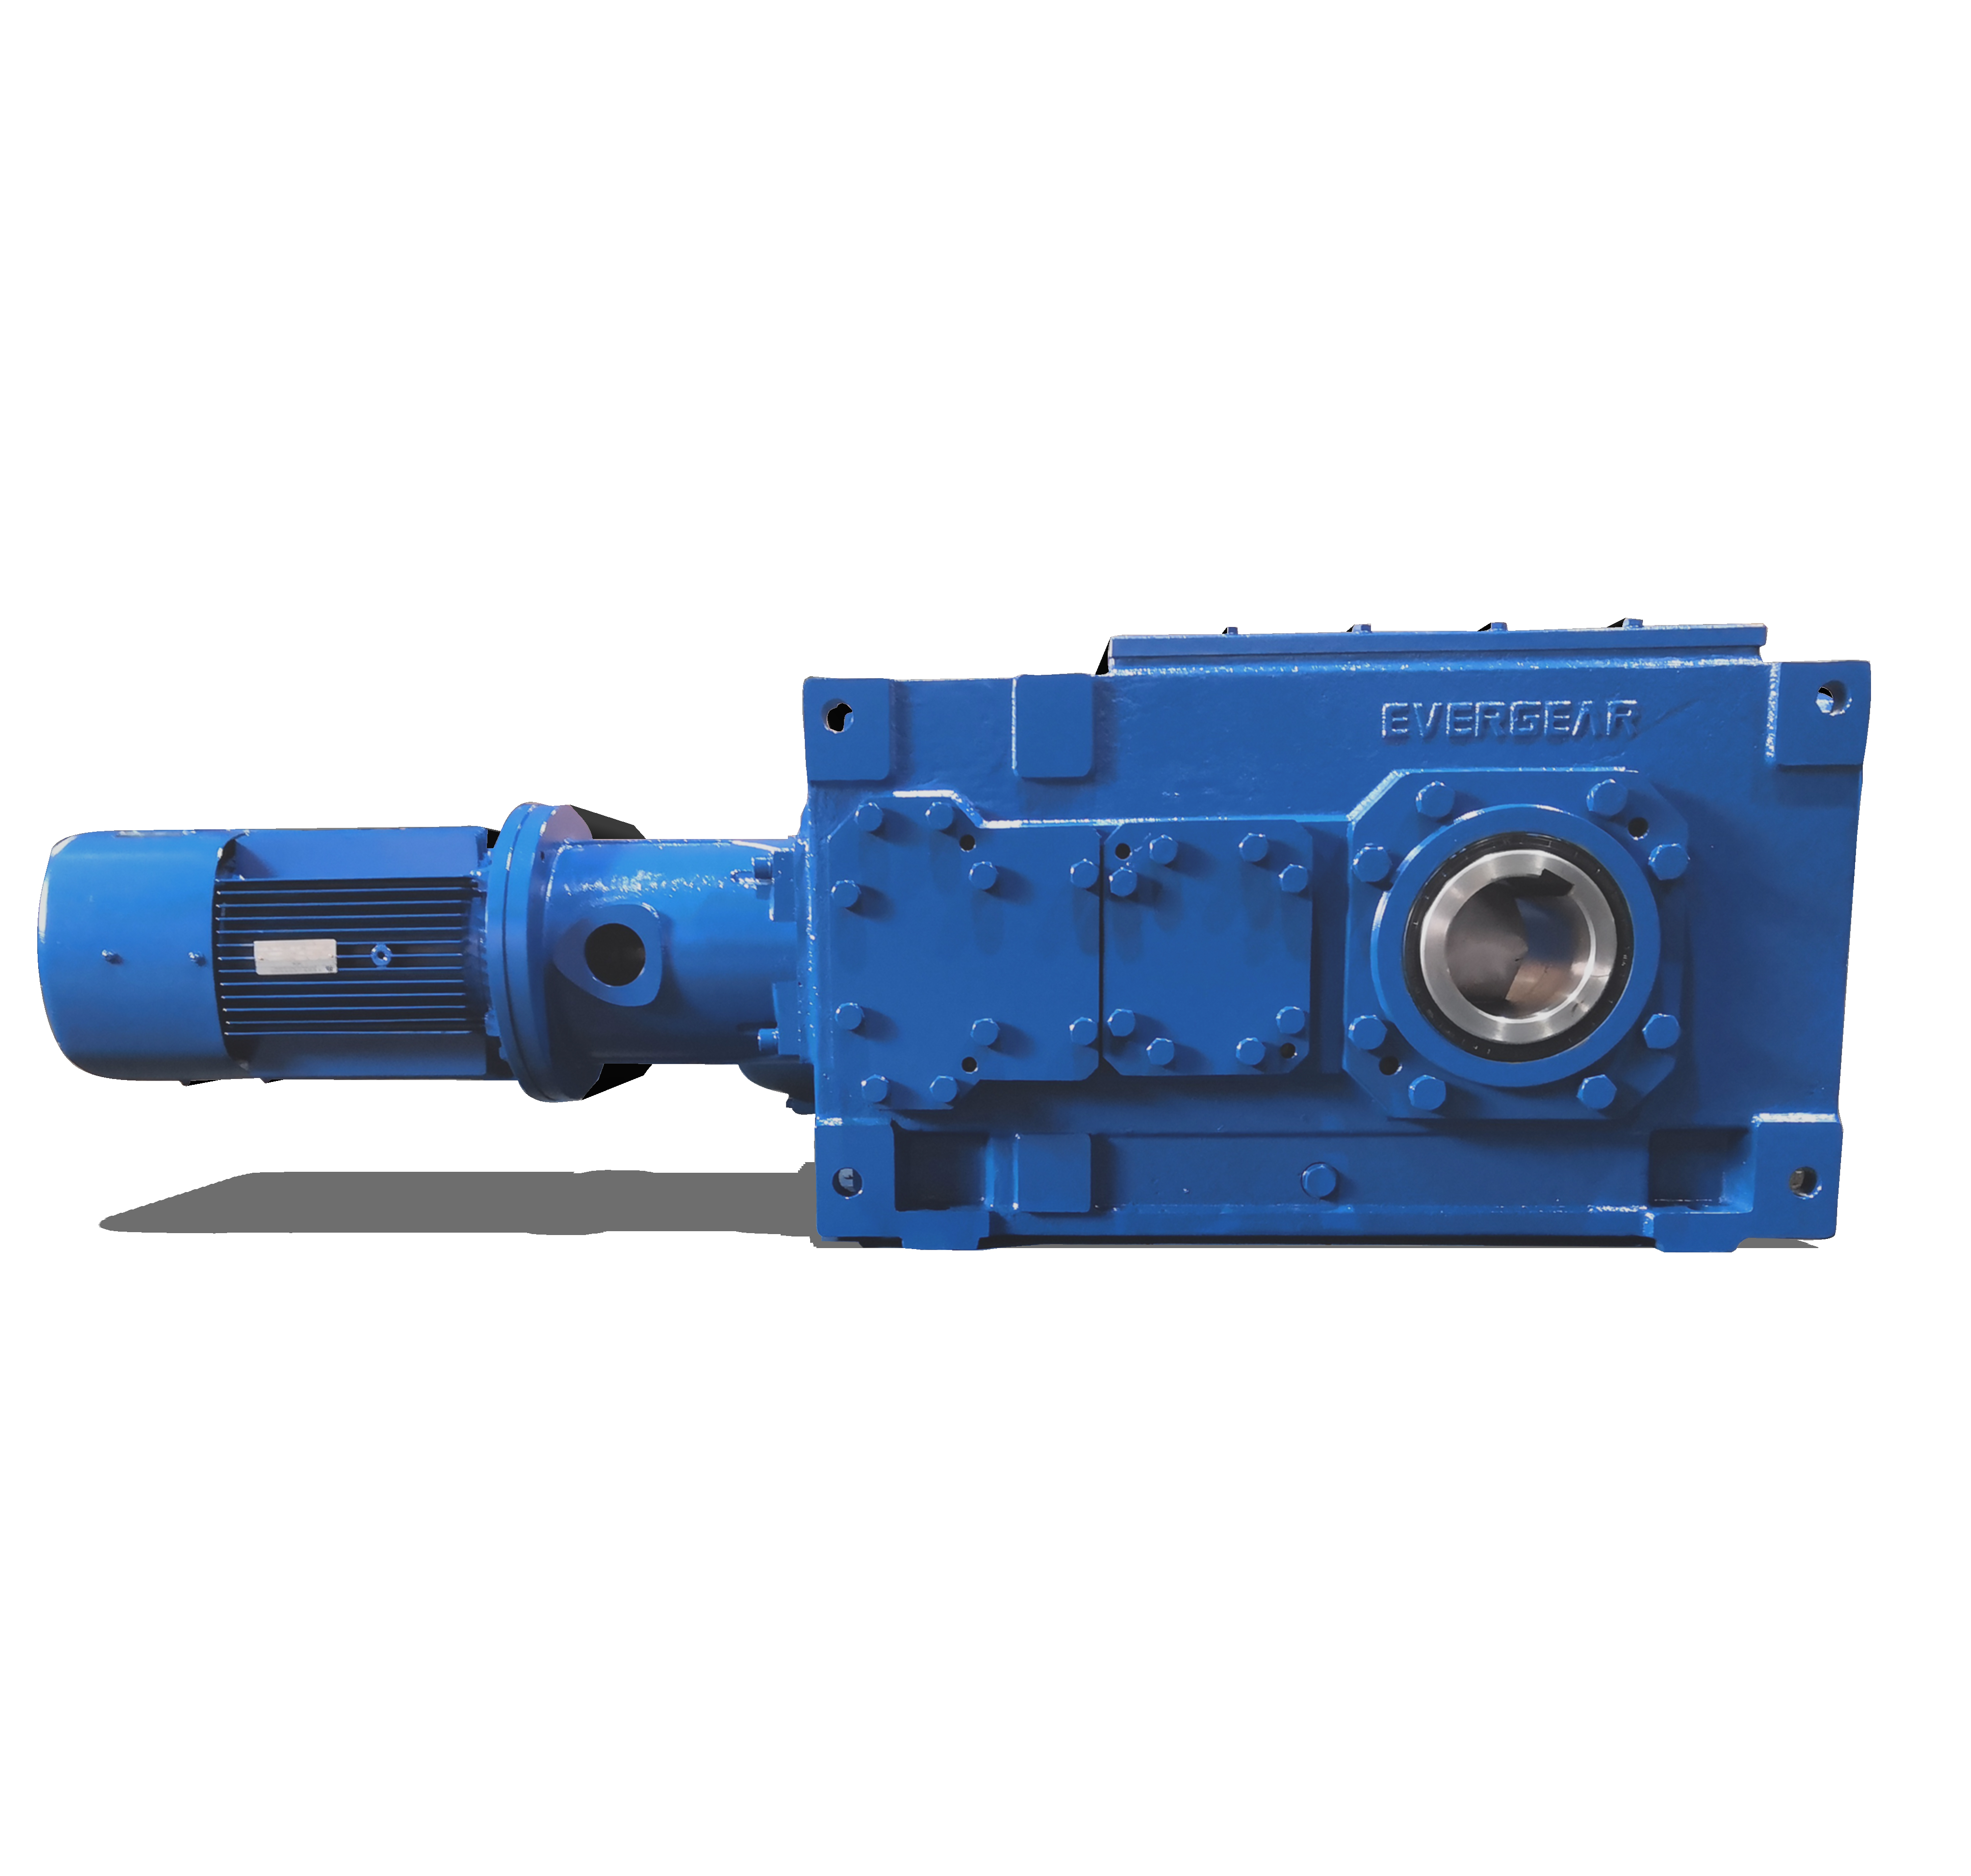 paramax industrial hb gearbox, High power parallel shaft, right angle gear reducer/reduction